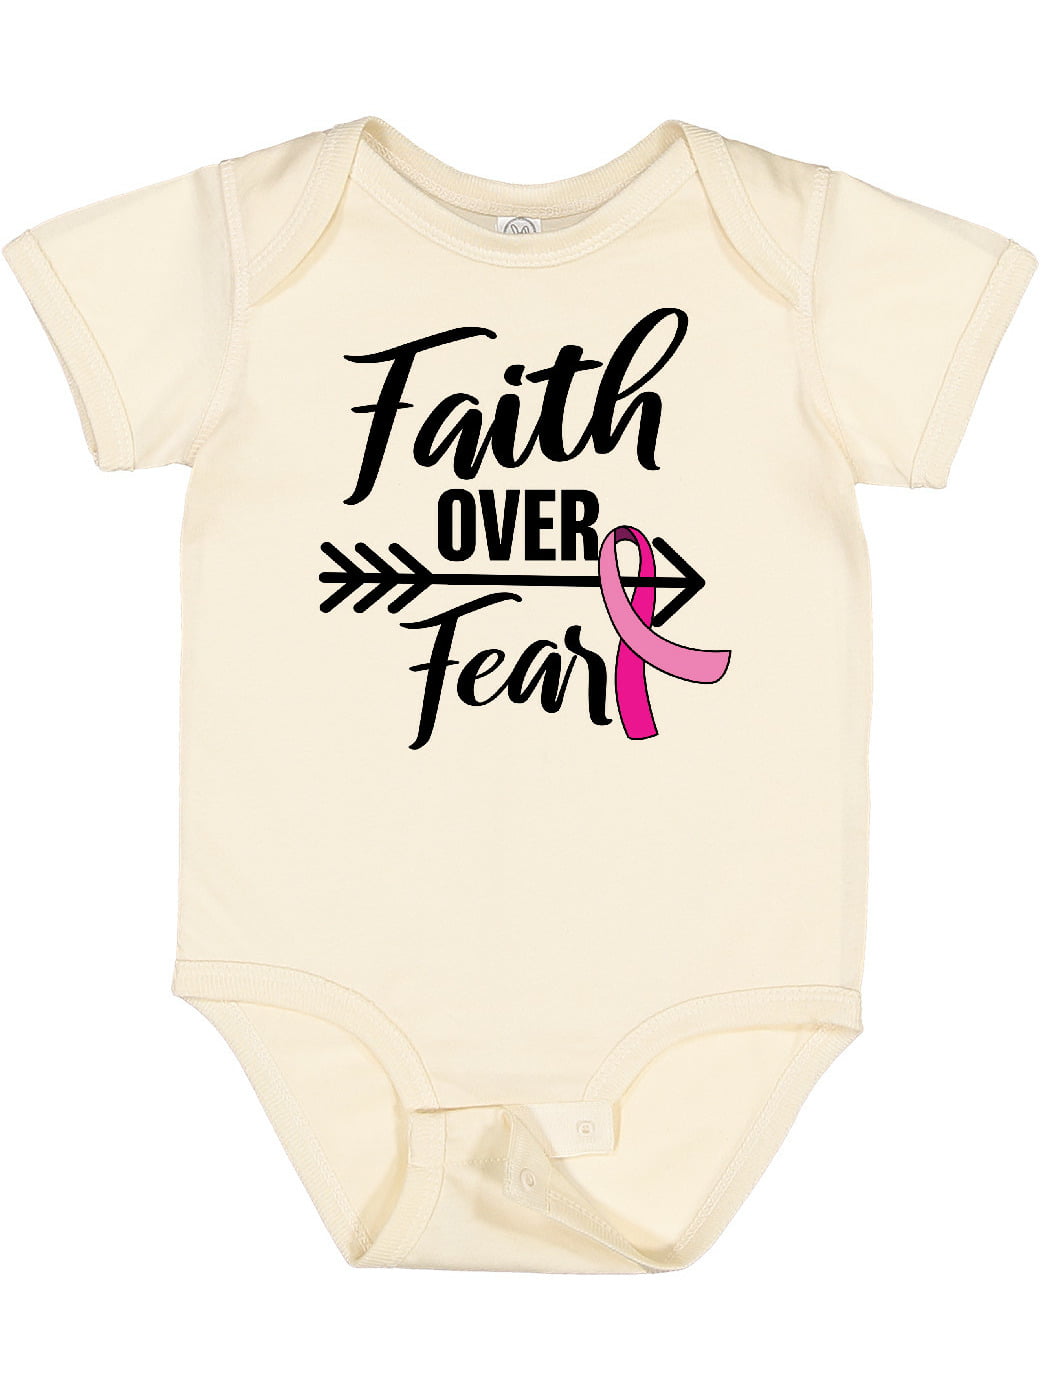 Tough Guys Wear Pink Infant Bodysuit Support Breast Cancer Awareness